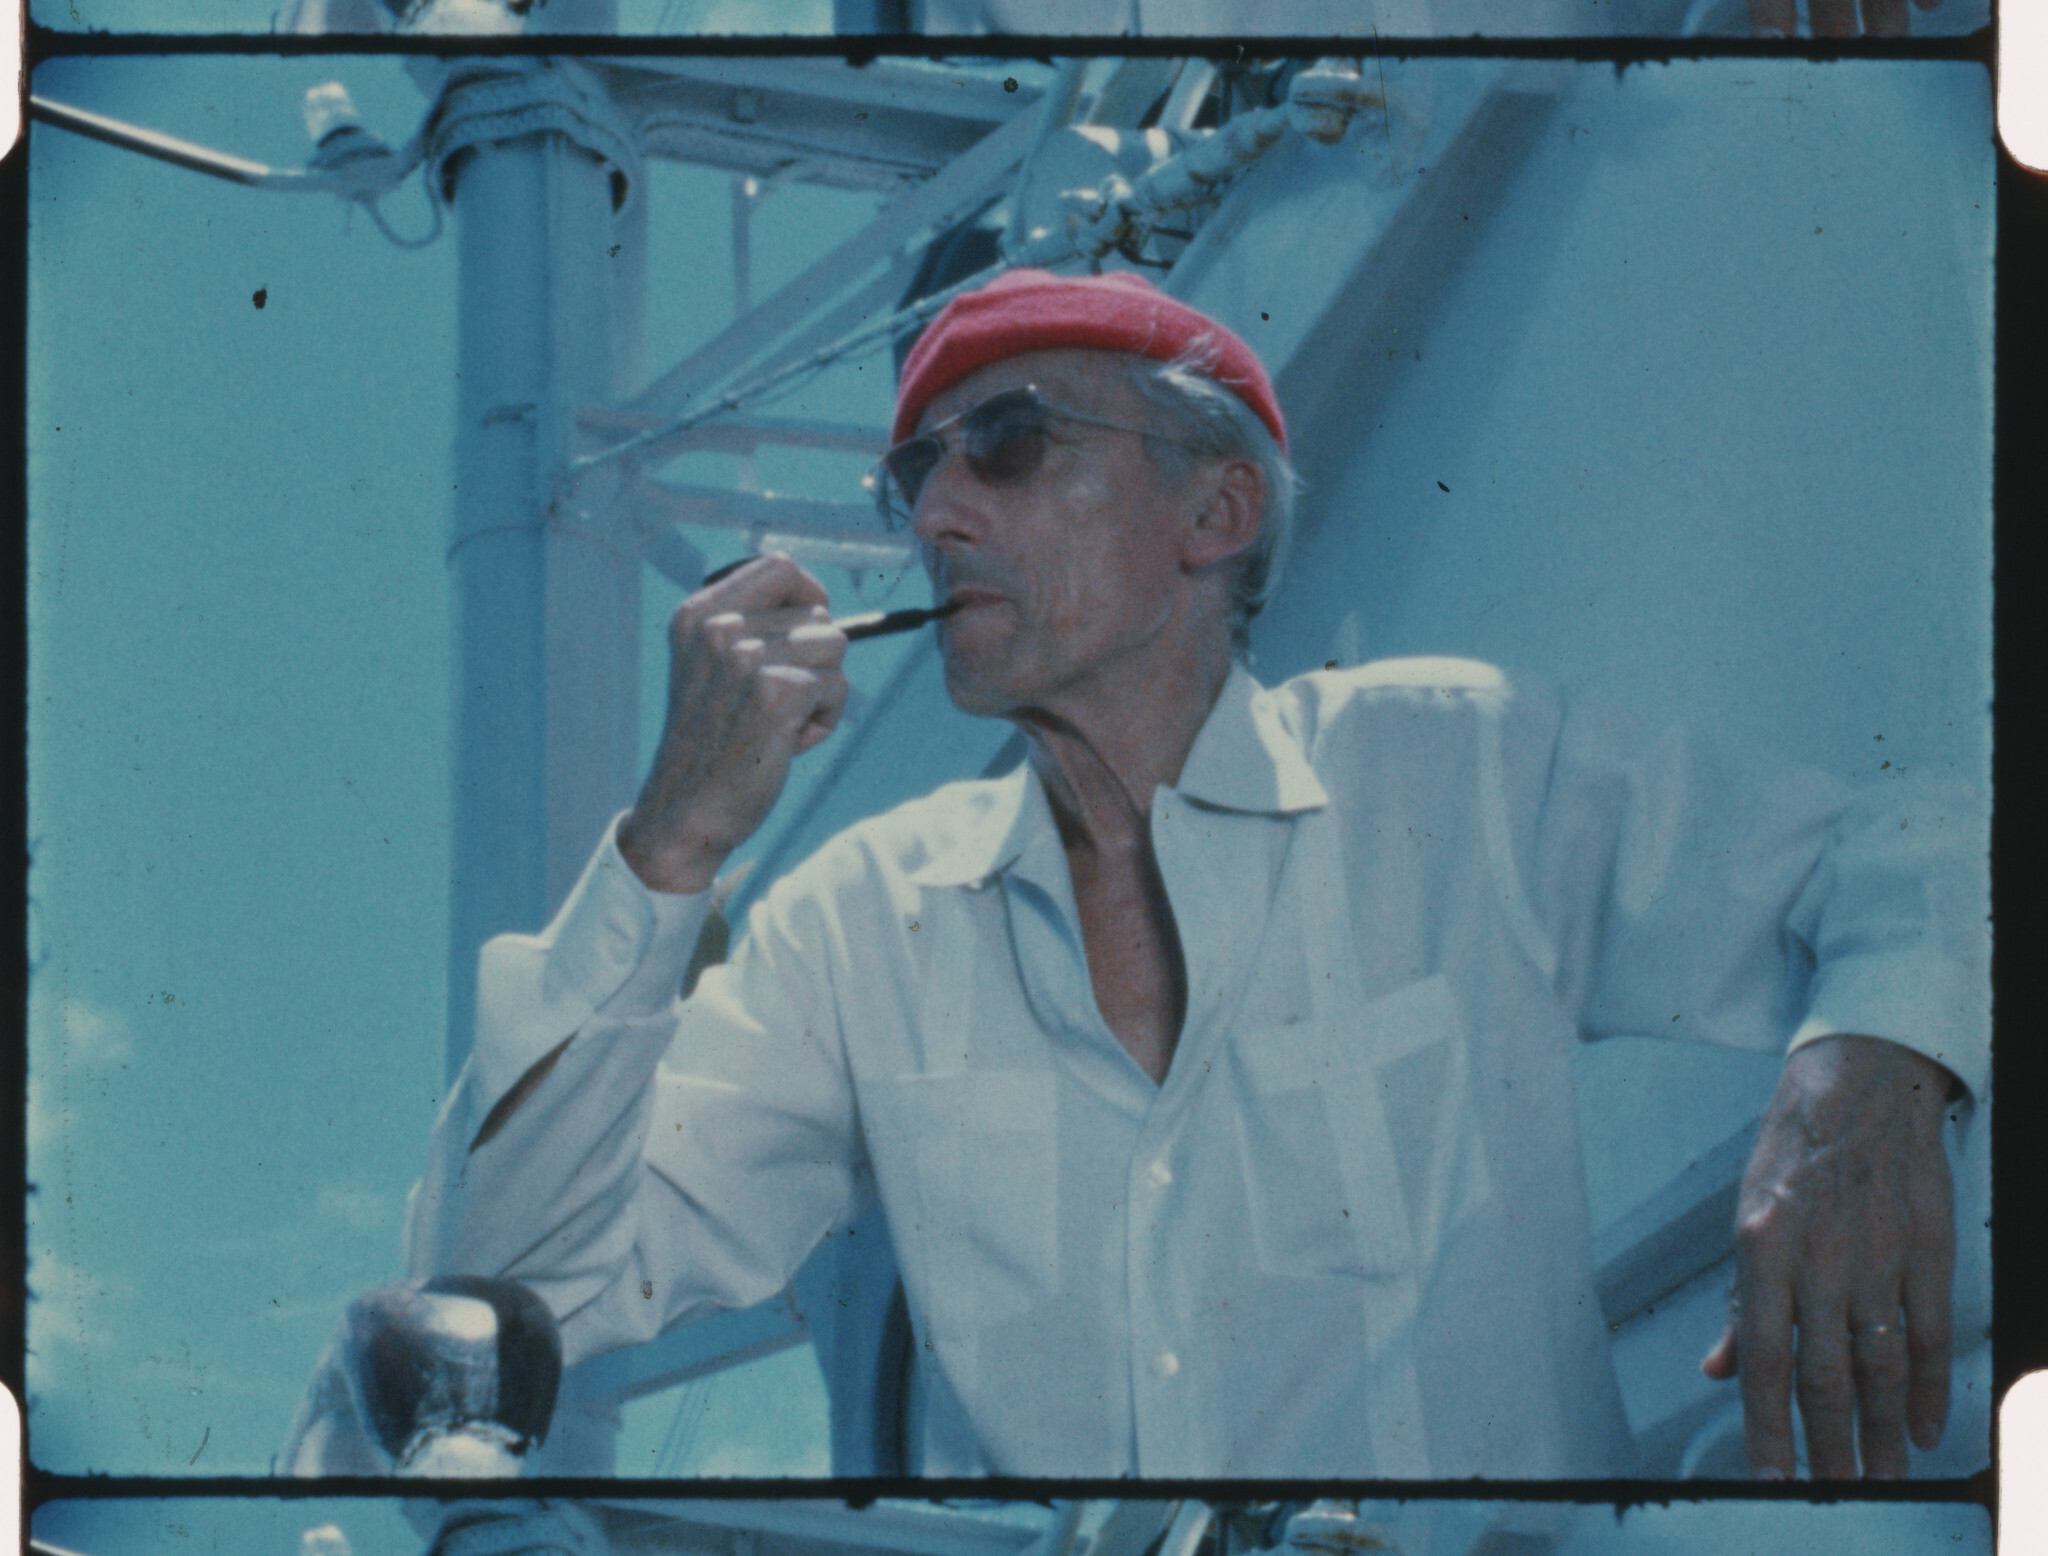 Jacques Cousteau wears his iconic red diving cap aboard his ship Calypso, circa 1970s. Photo: The Cousteau Society.